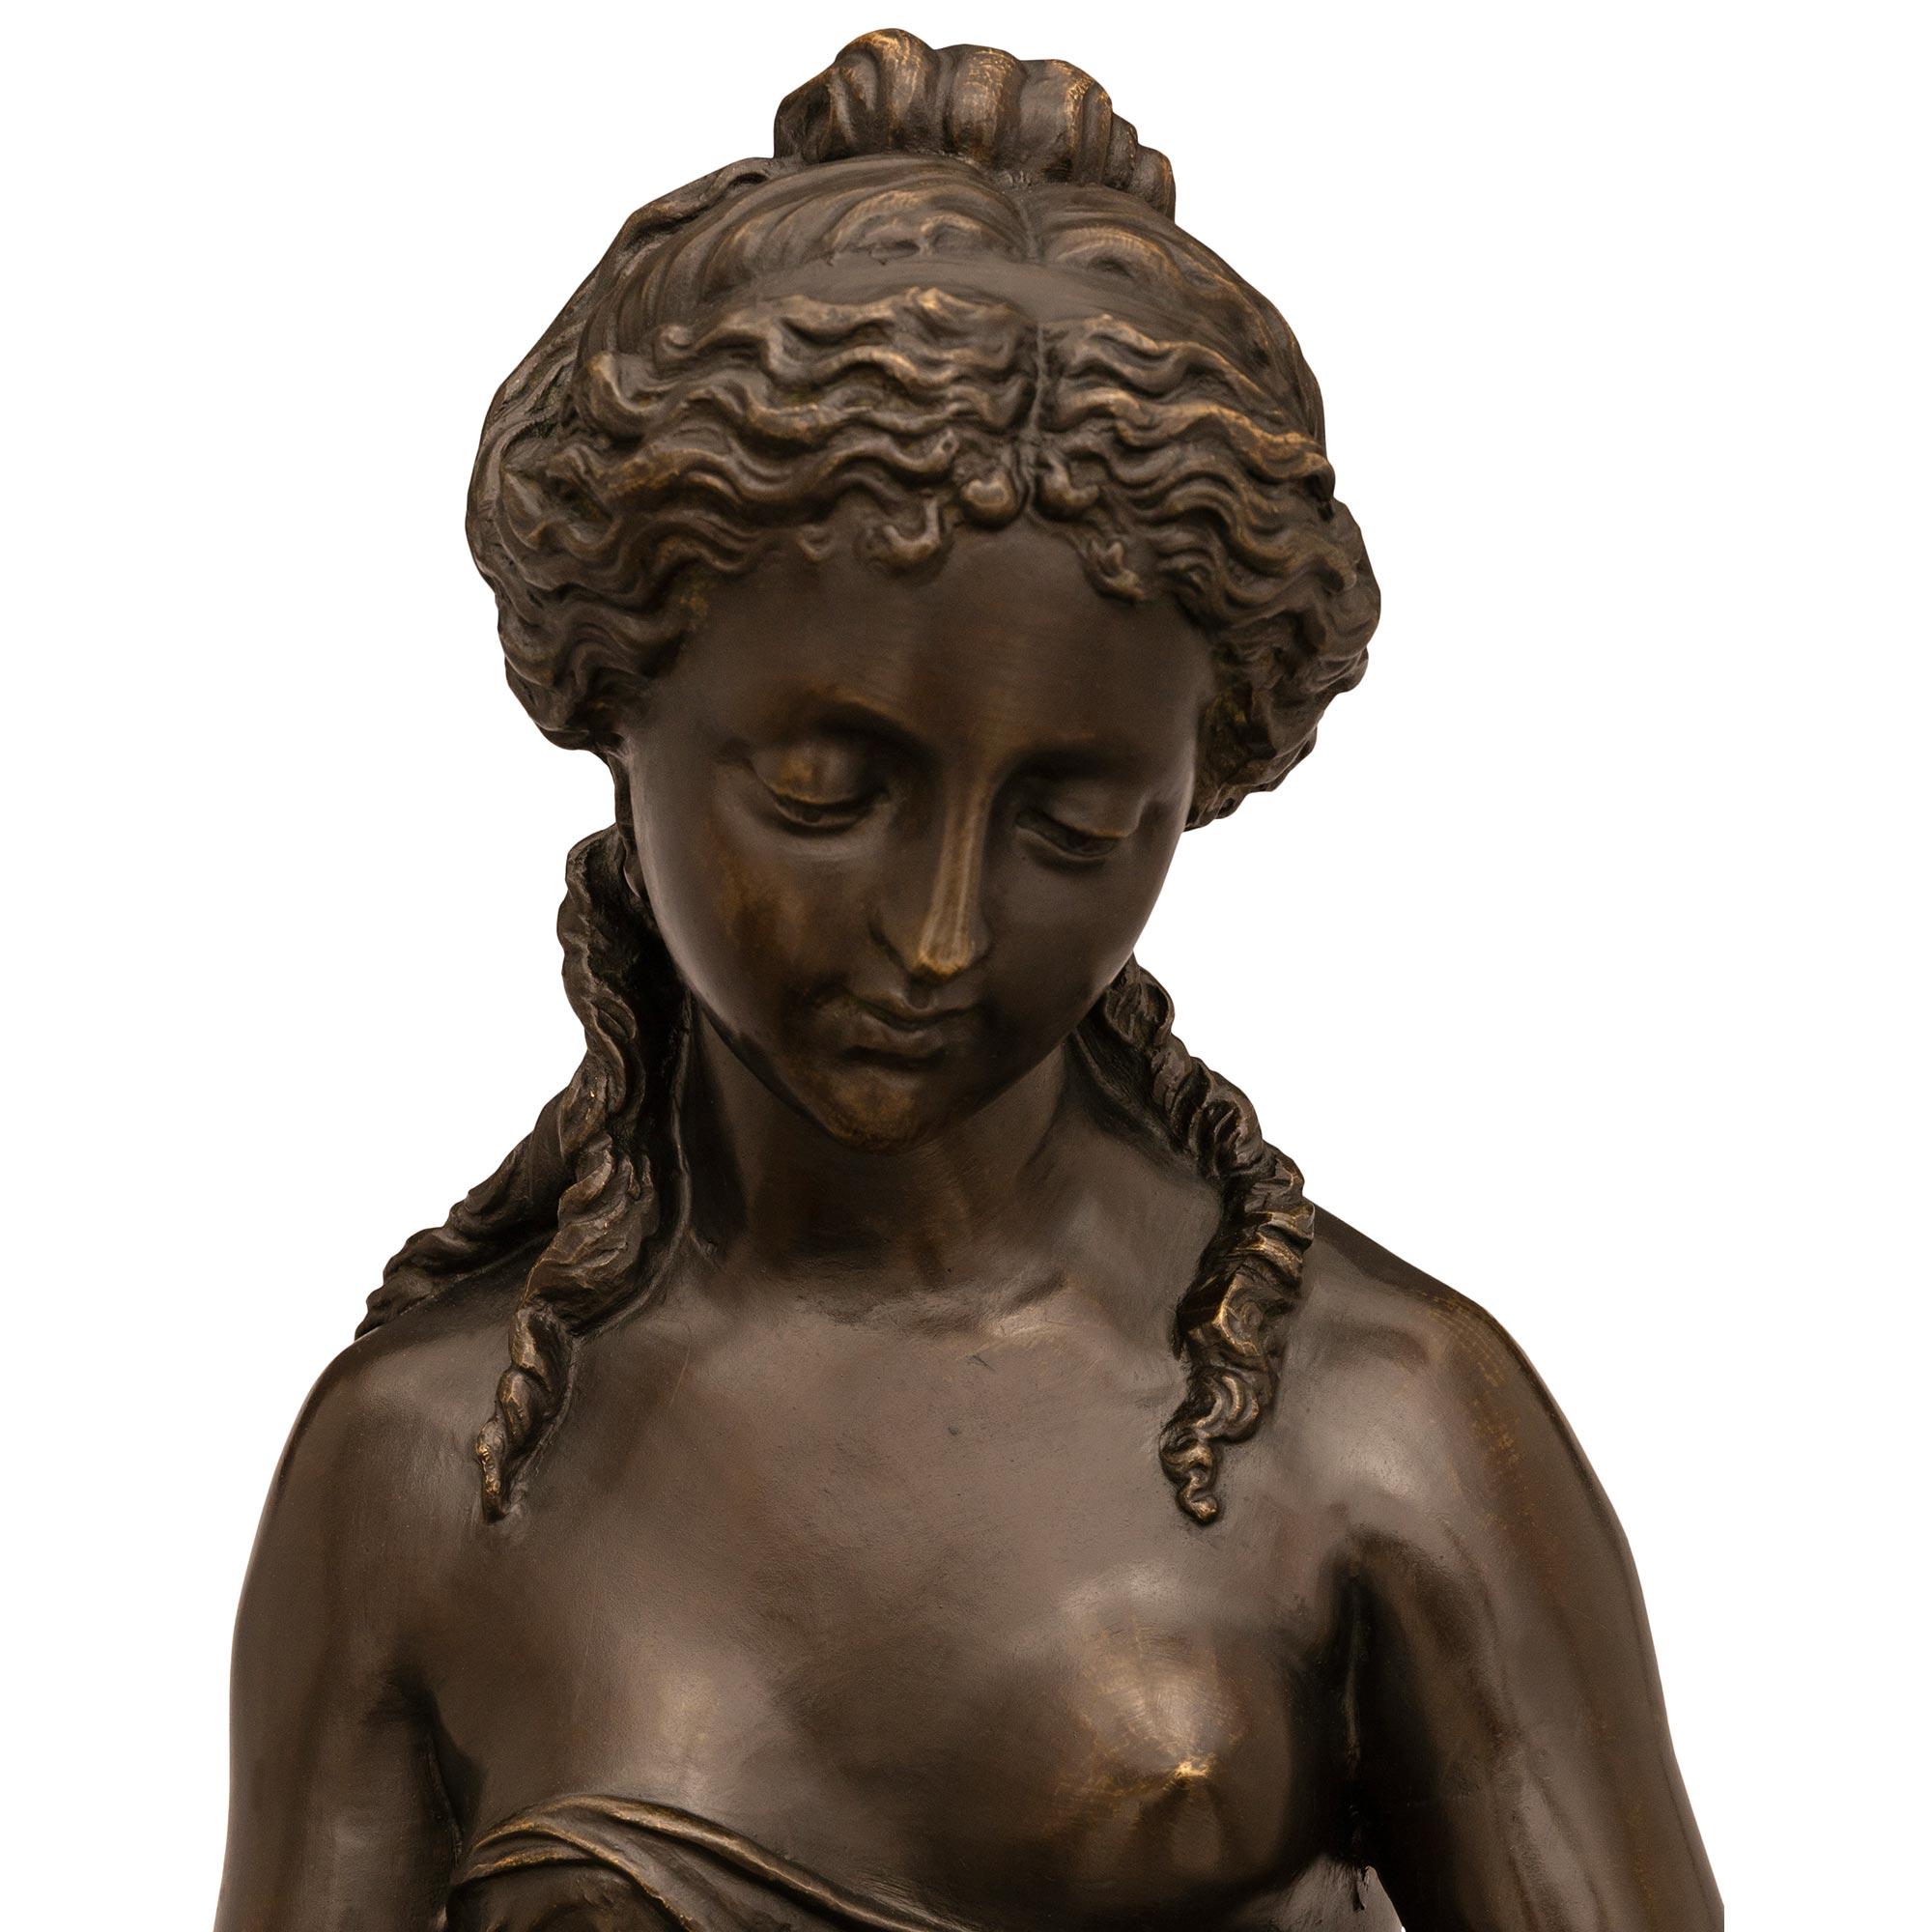 A wonderful and unique French 19th century patinated Bronze statue of a woman and child signed Stella. This finely detailed statue depicts a beautiful woman dressed in flowing garments while holding a scythe and rinsing the collected wheat with an